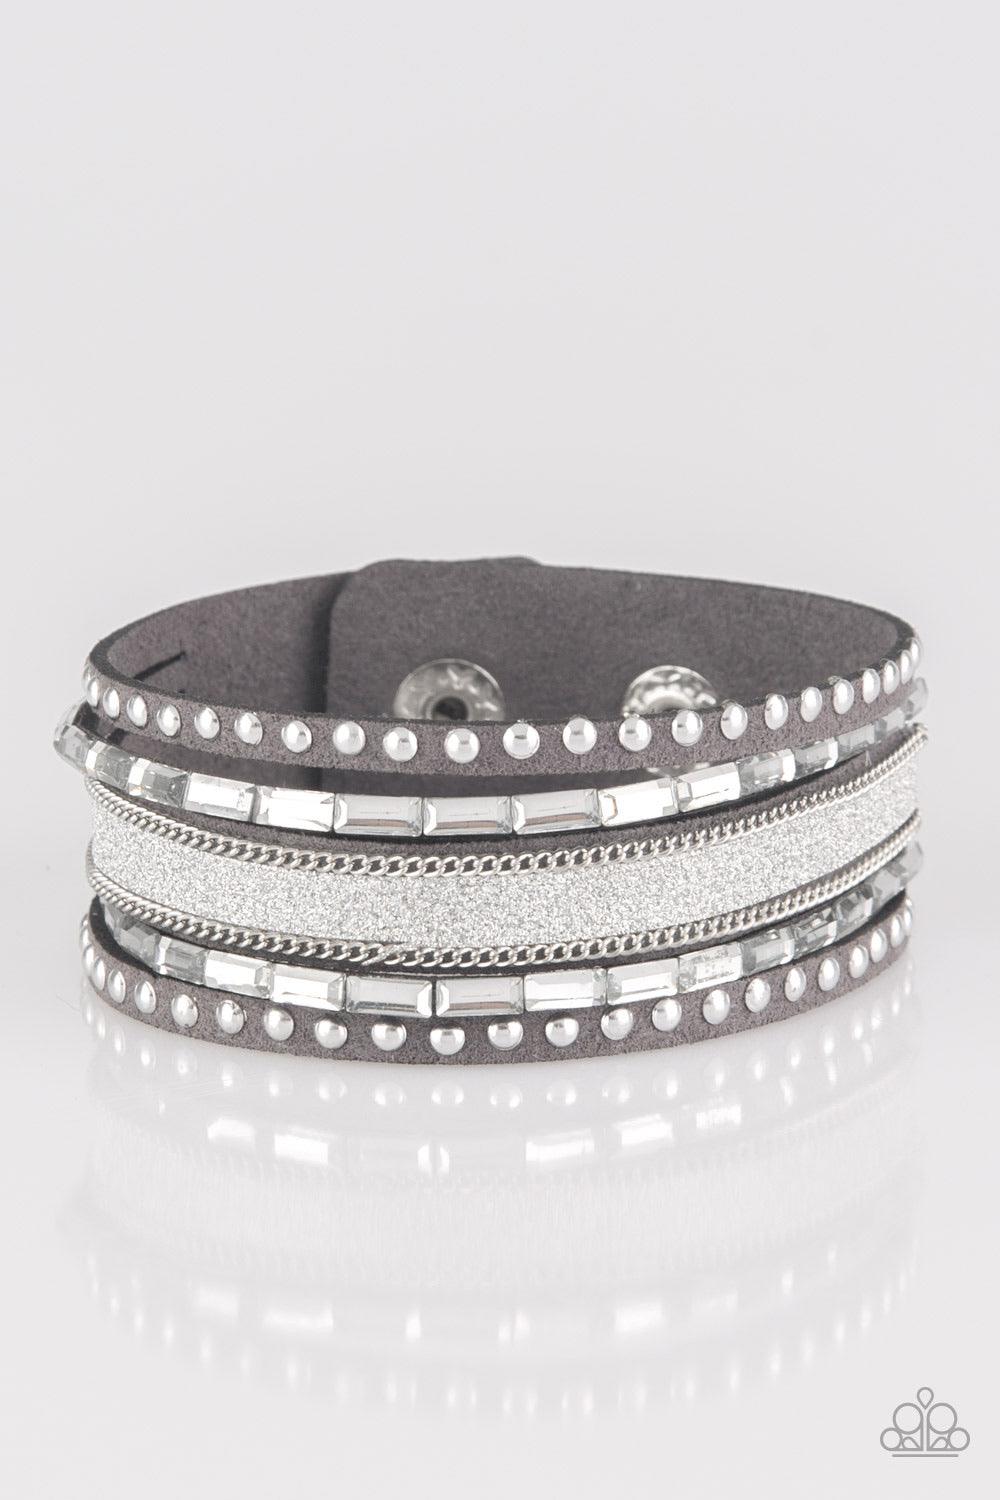 Paparazzi Accessories Seize The Sass - Silver Shimmery silver studs, dainty silver chains, and white emerald style cut rhinestones are encrusted along a gray suede band dusted in a sparkling center for a sassy look. Features an adjustable snap closure. So